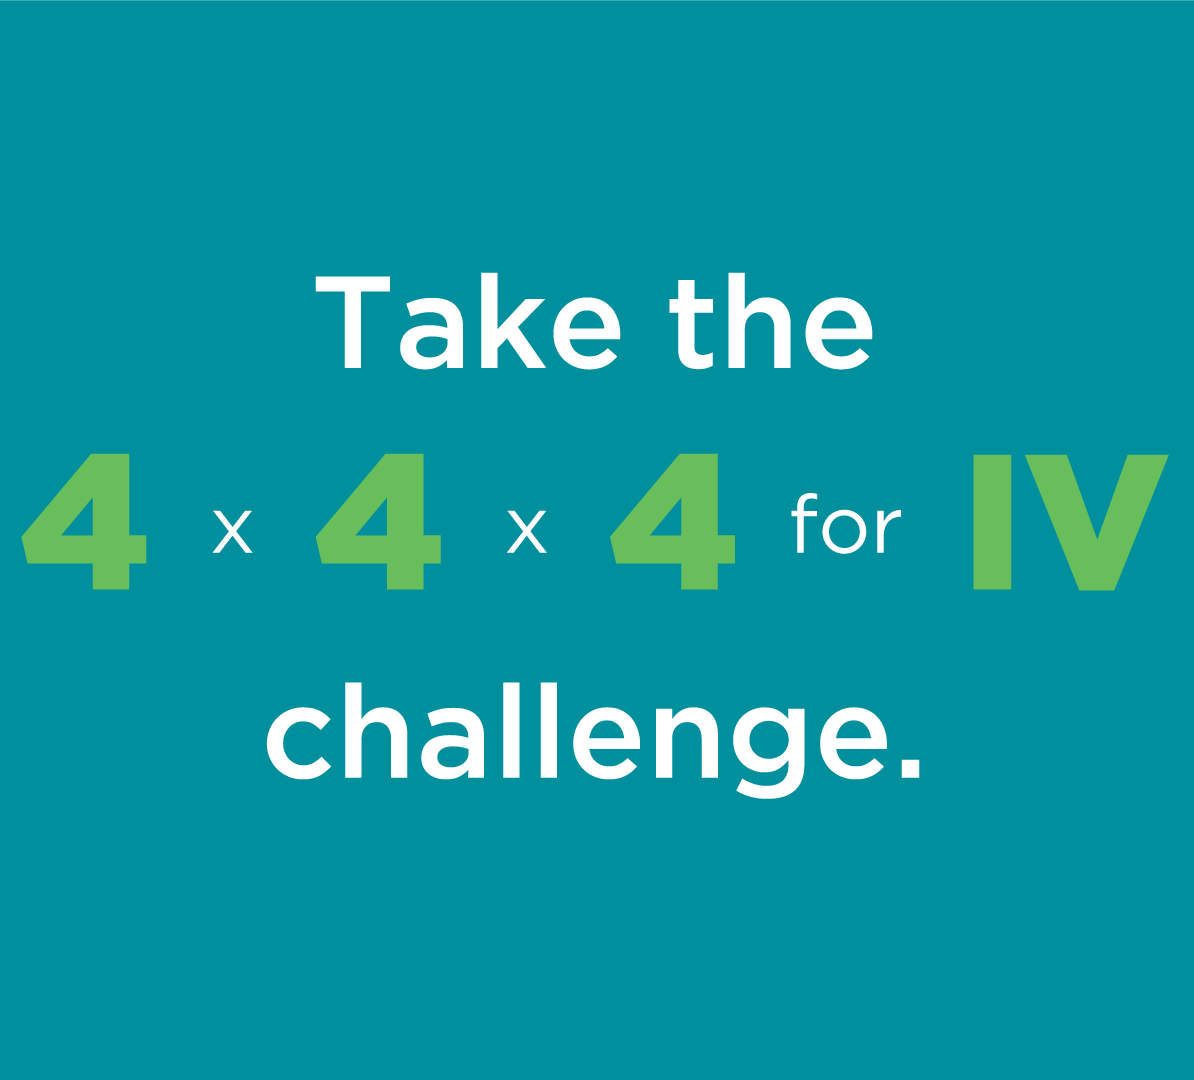 Take the 4 x 4 x 4 for IV Challenge!